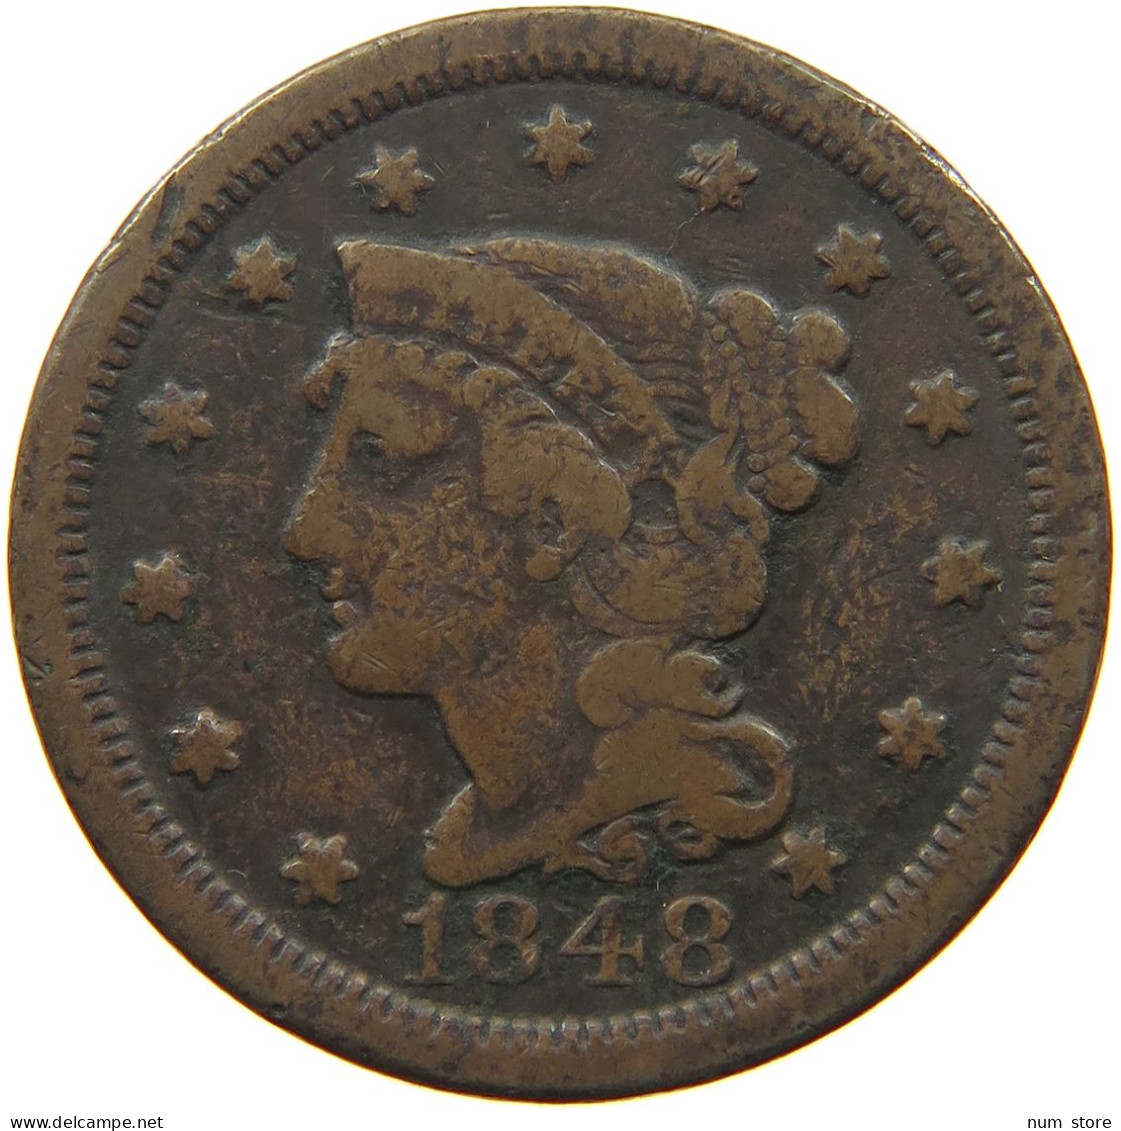 UNITED STATES OF AMERICA LARGE CENT 1848 BRAIDED HAIR #t141 0257 - 1840-1857: Braided Hair (Cheveux Tressés)